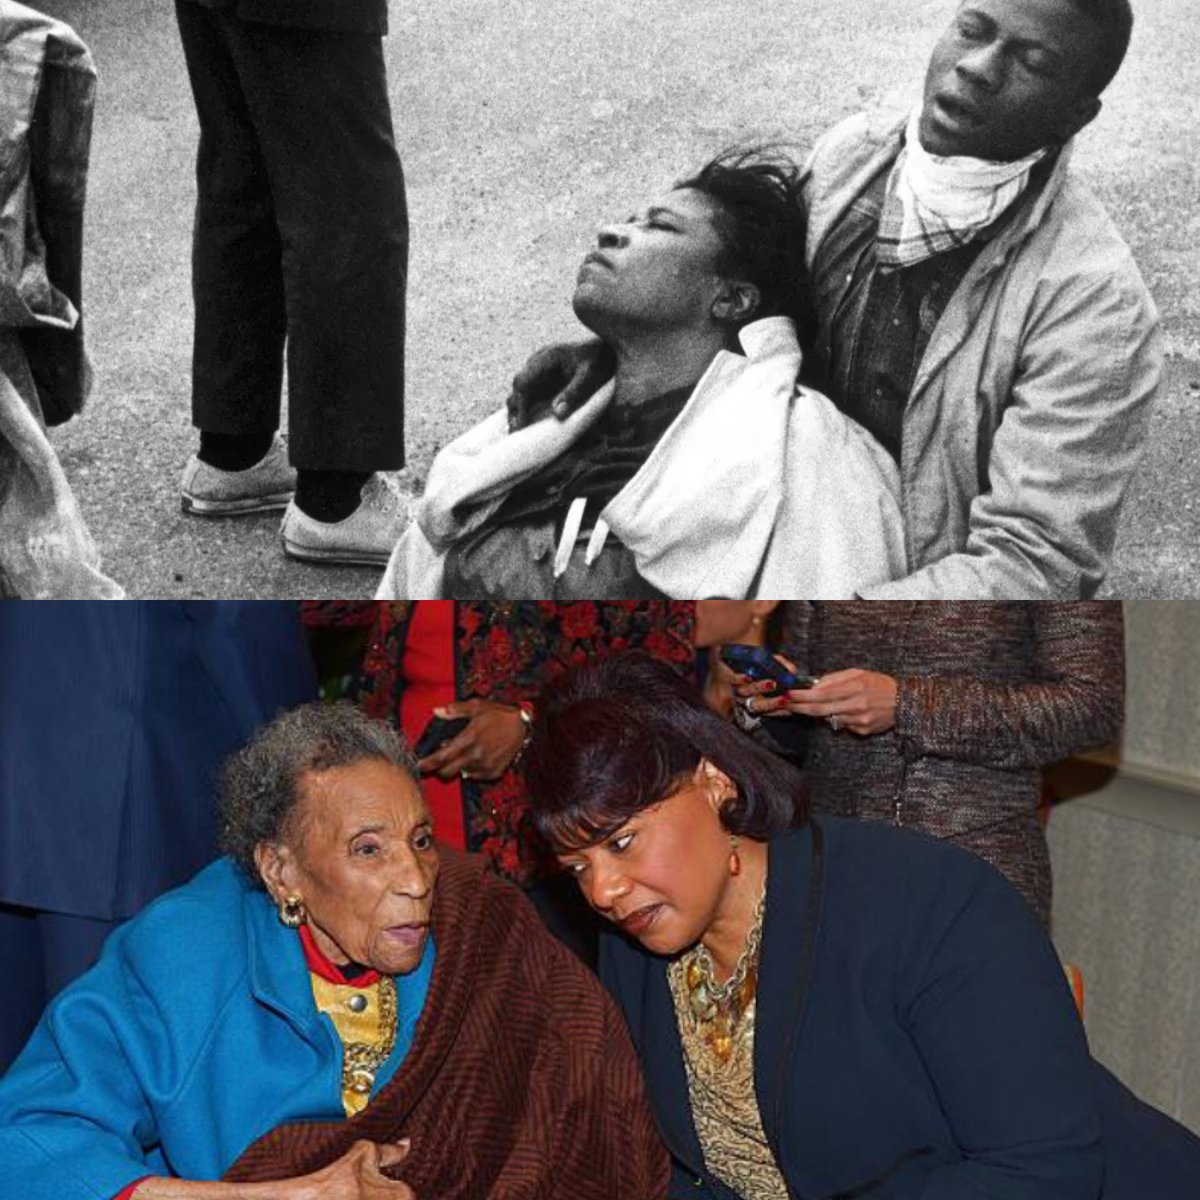 On this 1st Sunday in March, we remember the heroic nonviolent foot soldiers who risked their lives fighting for #votingrights on #BloodySunday. May we never forget the courage of #AmeliaBoyntonRobinson. The work isn’t done - let’s #ConstitutionalizeVotingRights. #Selma